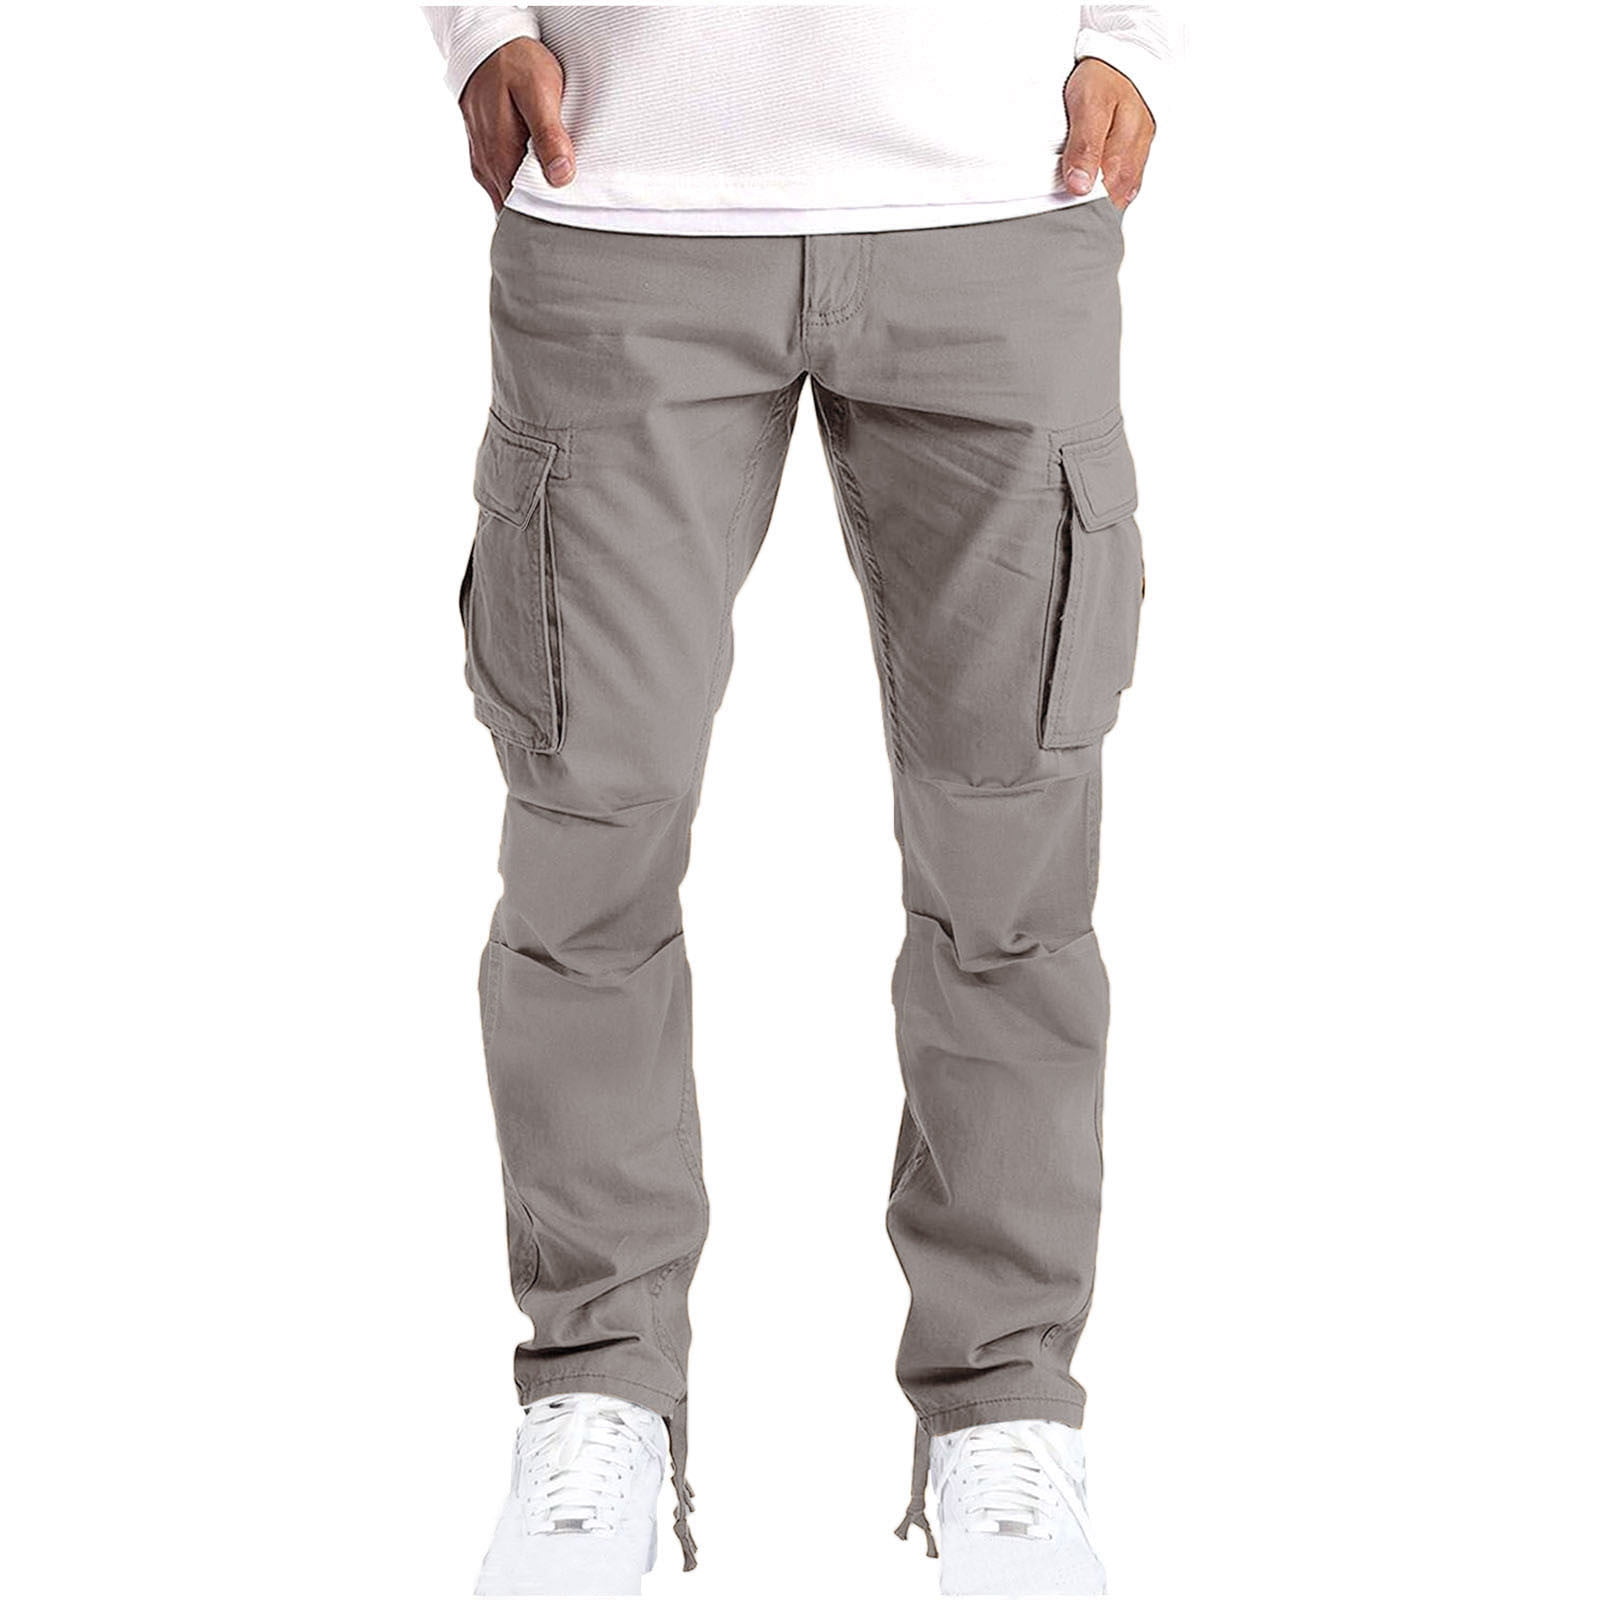 Wool Pants for Men, Warm Men's Woolen Trousers, Pants for Winter, Casual  Outdoor Pants, Stylish Jogging Pants, Camping Clothes. 